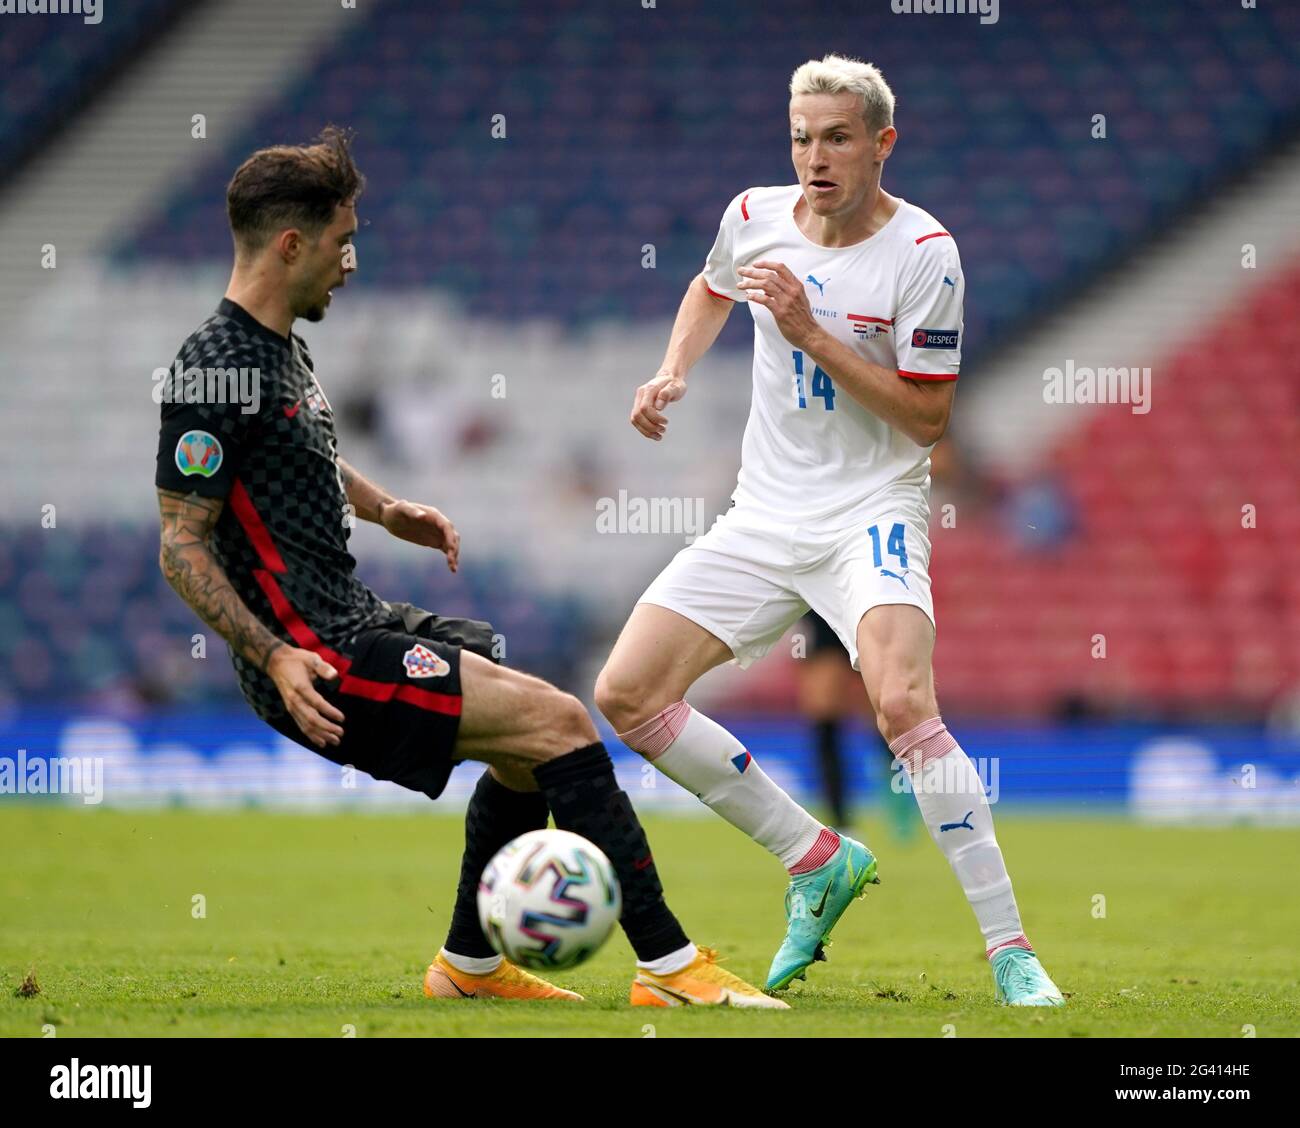 Croatia's Sime Vrsaljko (left) and Czech Republic's Jakub Jankto battle for the ball during the UEFA Euro 2020 Group D match at Hampden Park, Glasgow. Picture date: Friday June 18, 2021. Stock Photo